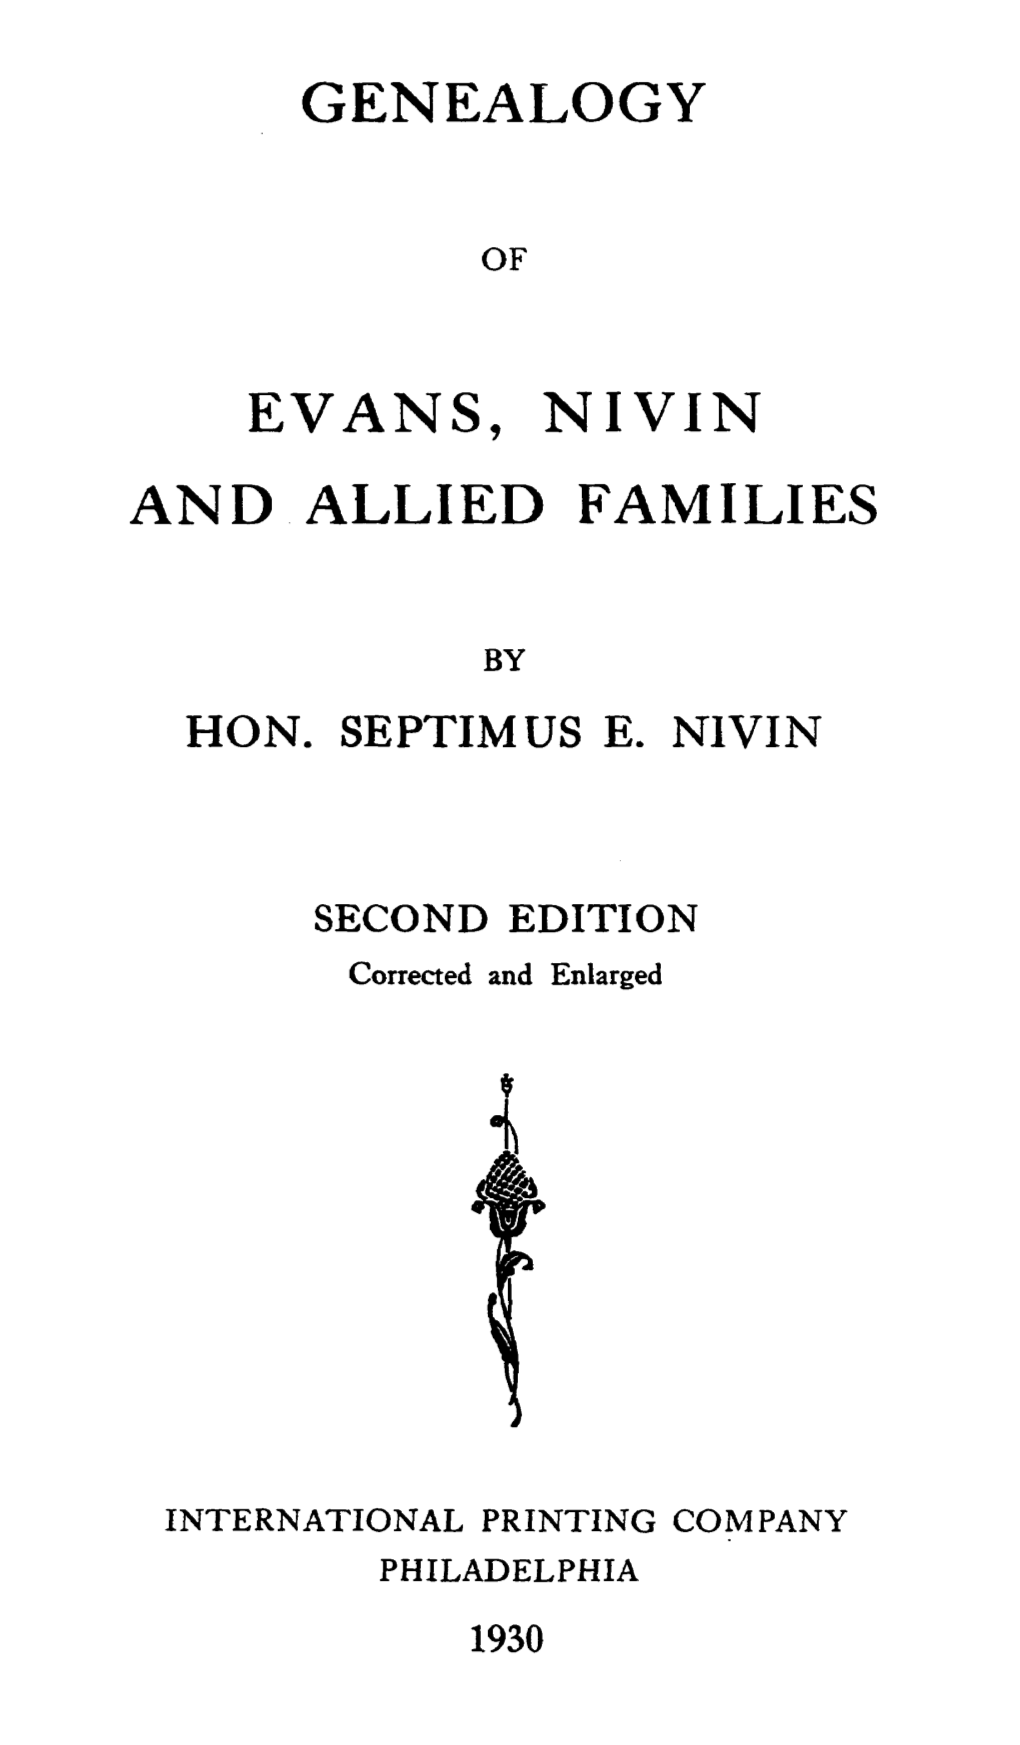 Genealogy Evans, Nivin and Allied Families